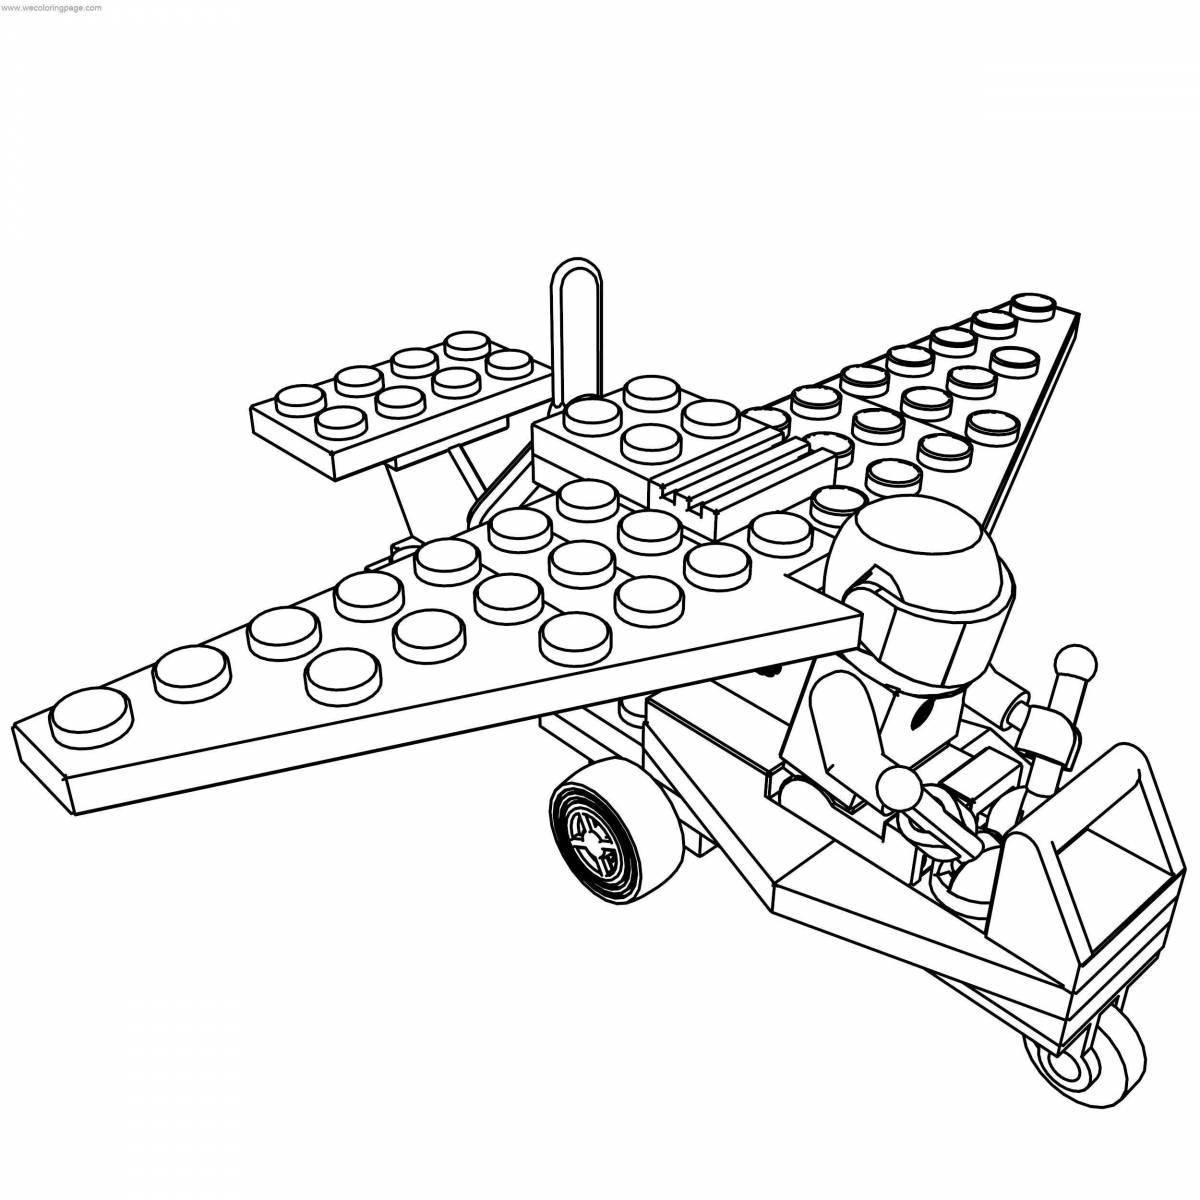 Exciting lego plane coloring page